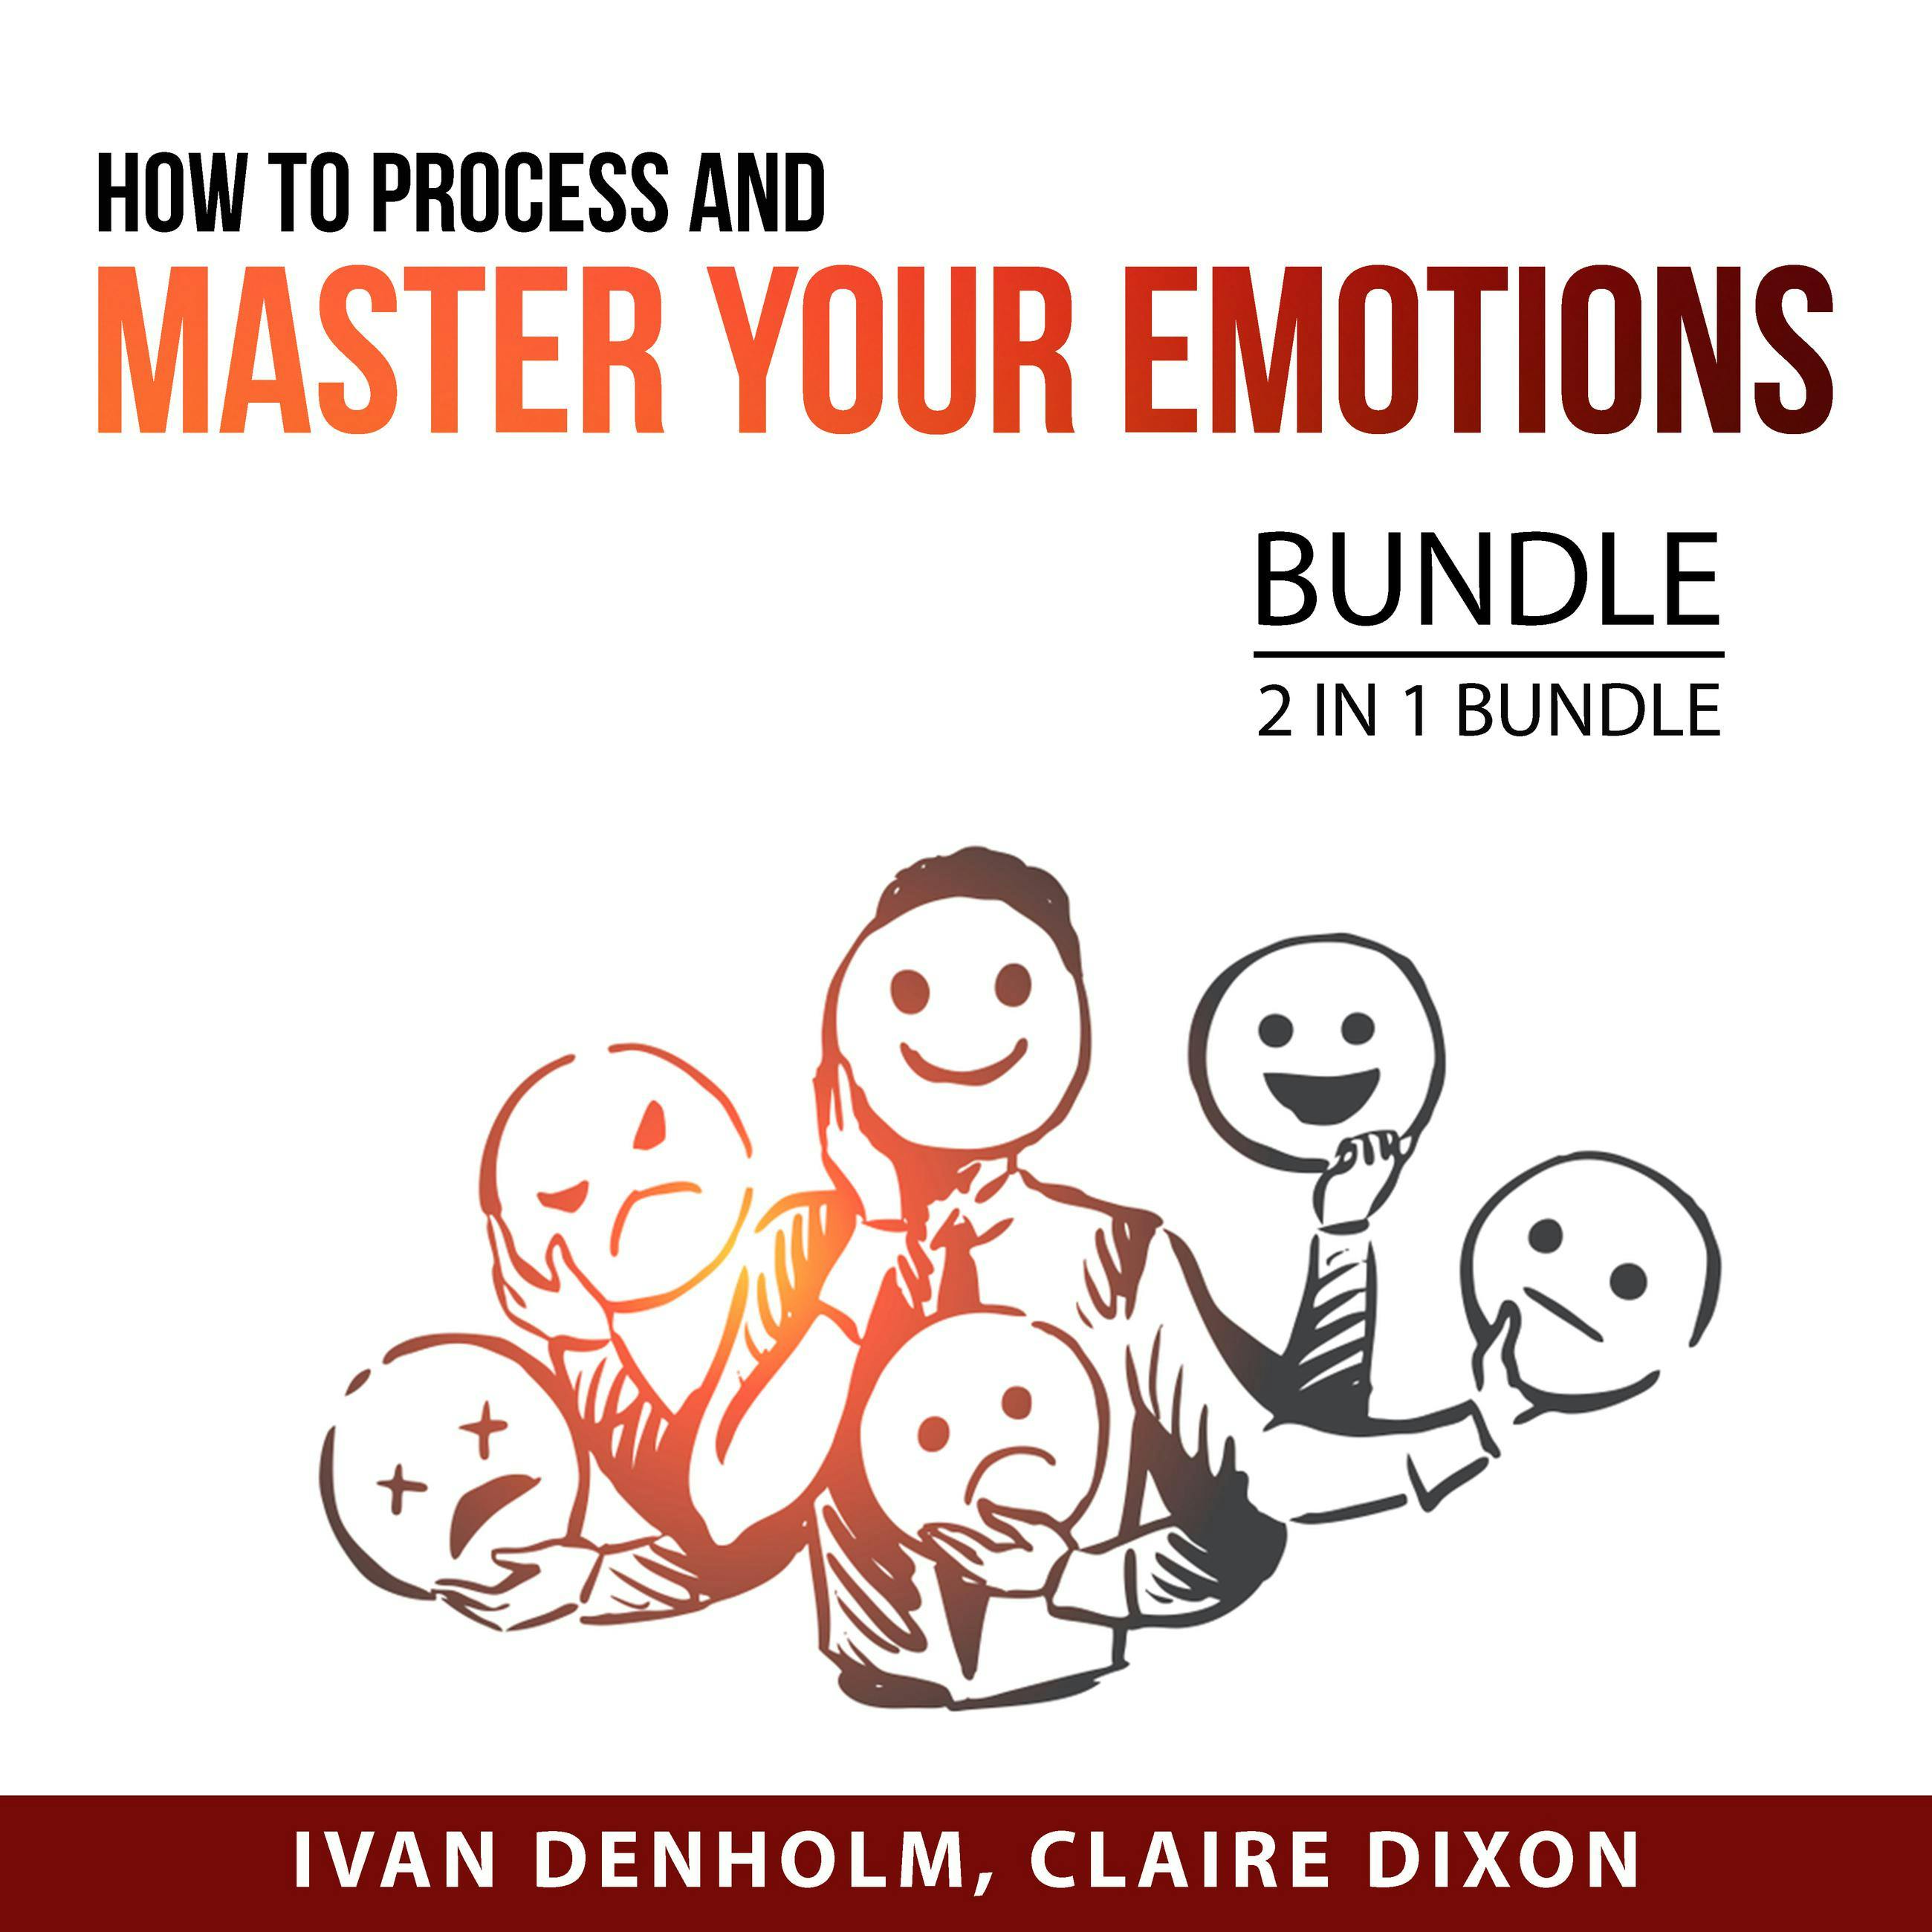 How to Process and Master Your Emotions Bundle, 2 in 1 Bundle:: Master Your Feelings and How to Feel Good - undefined